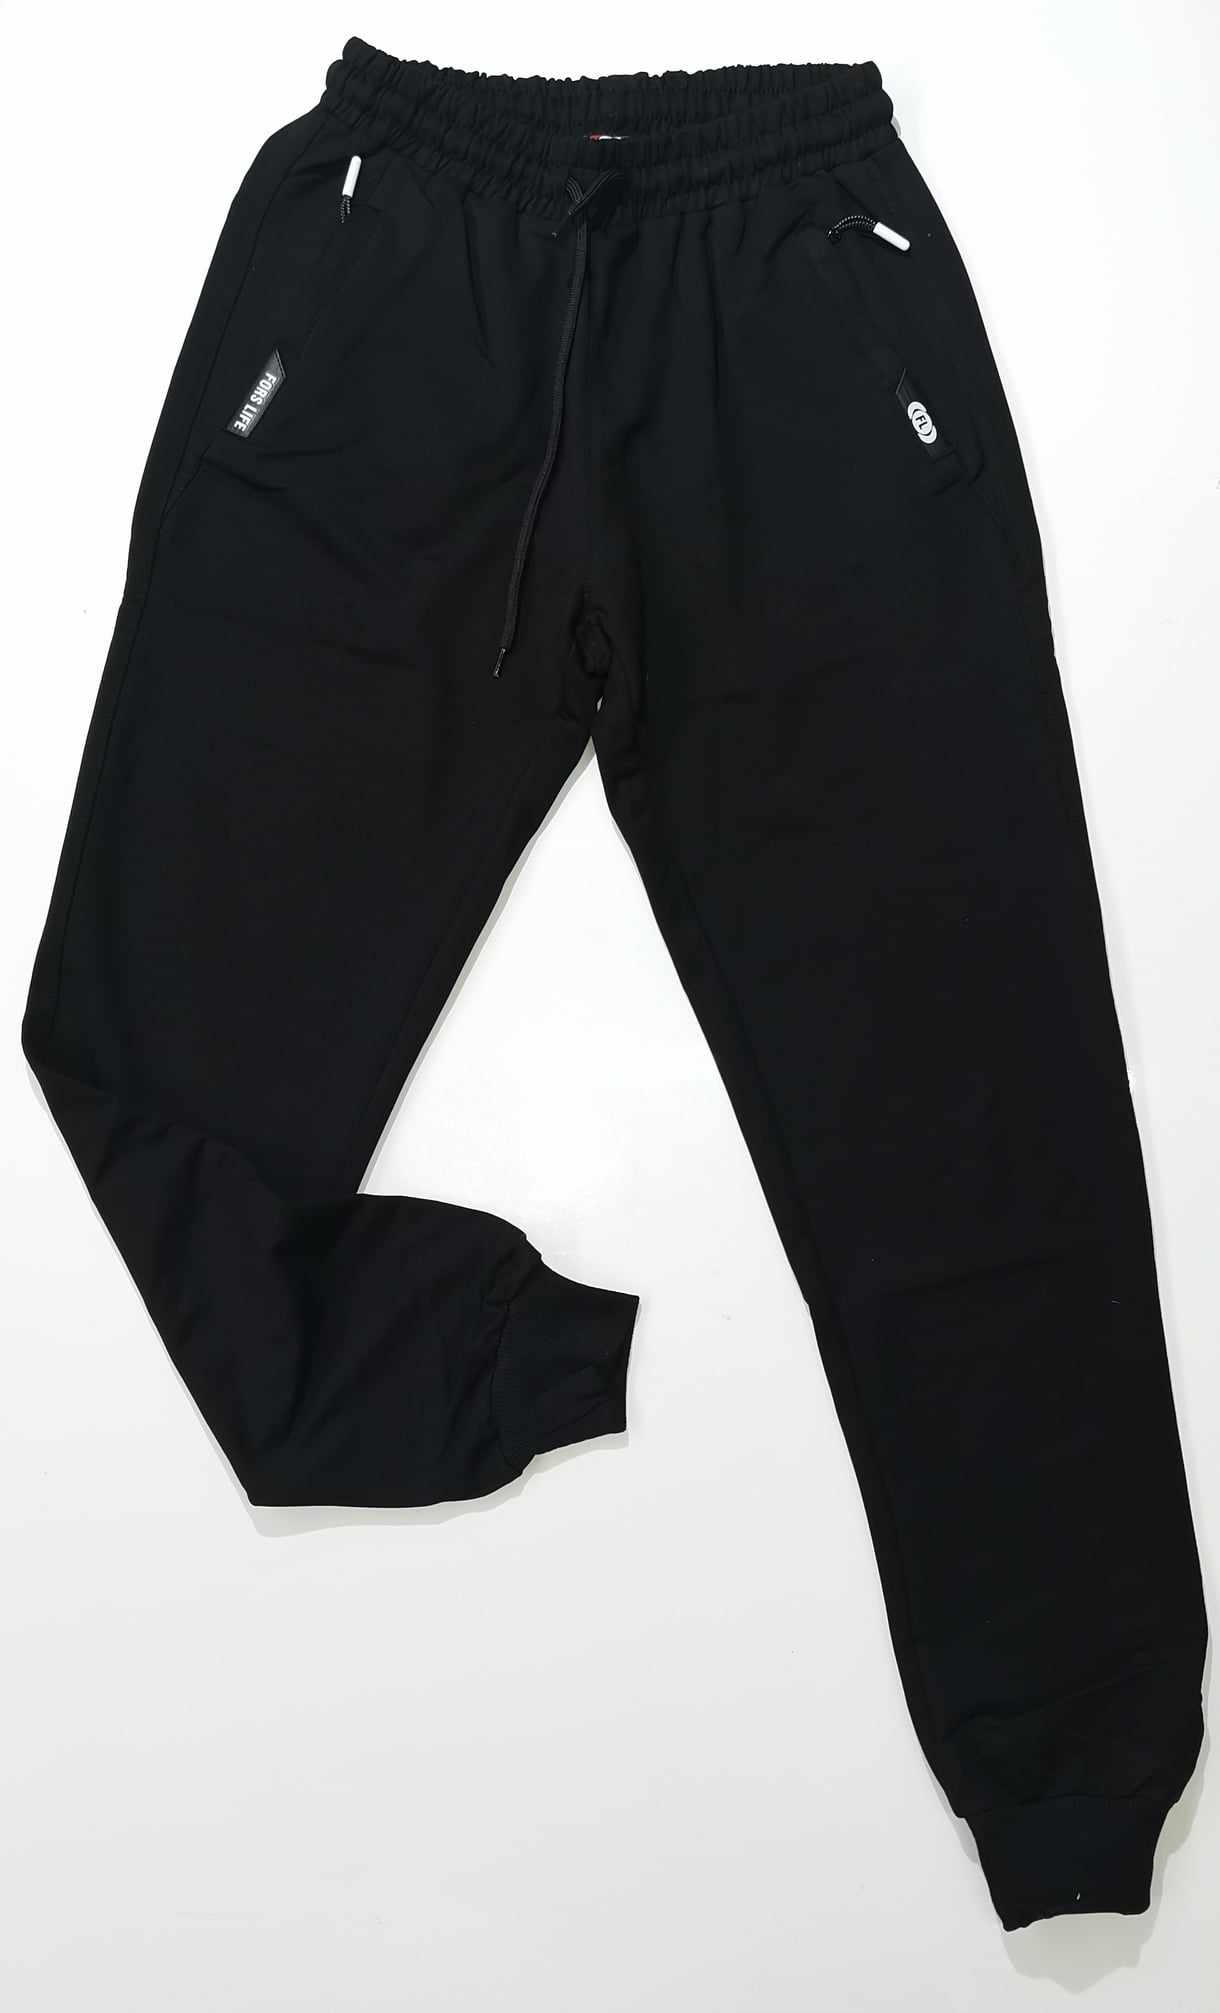 TROUSER FORS LIFE 24/24 MONOC. TRACK WITH ZIP POCKETS ΜΑΝ